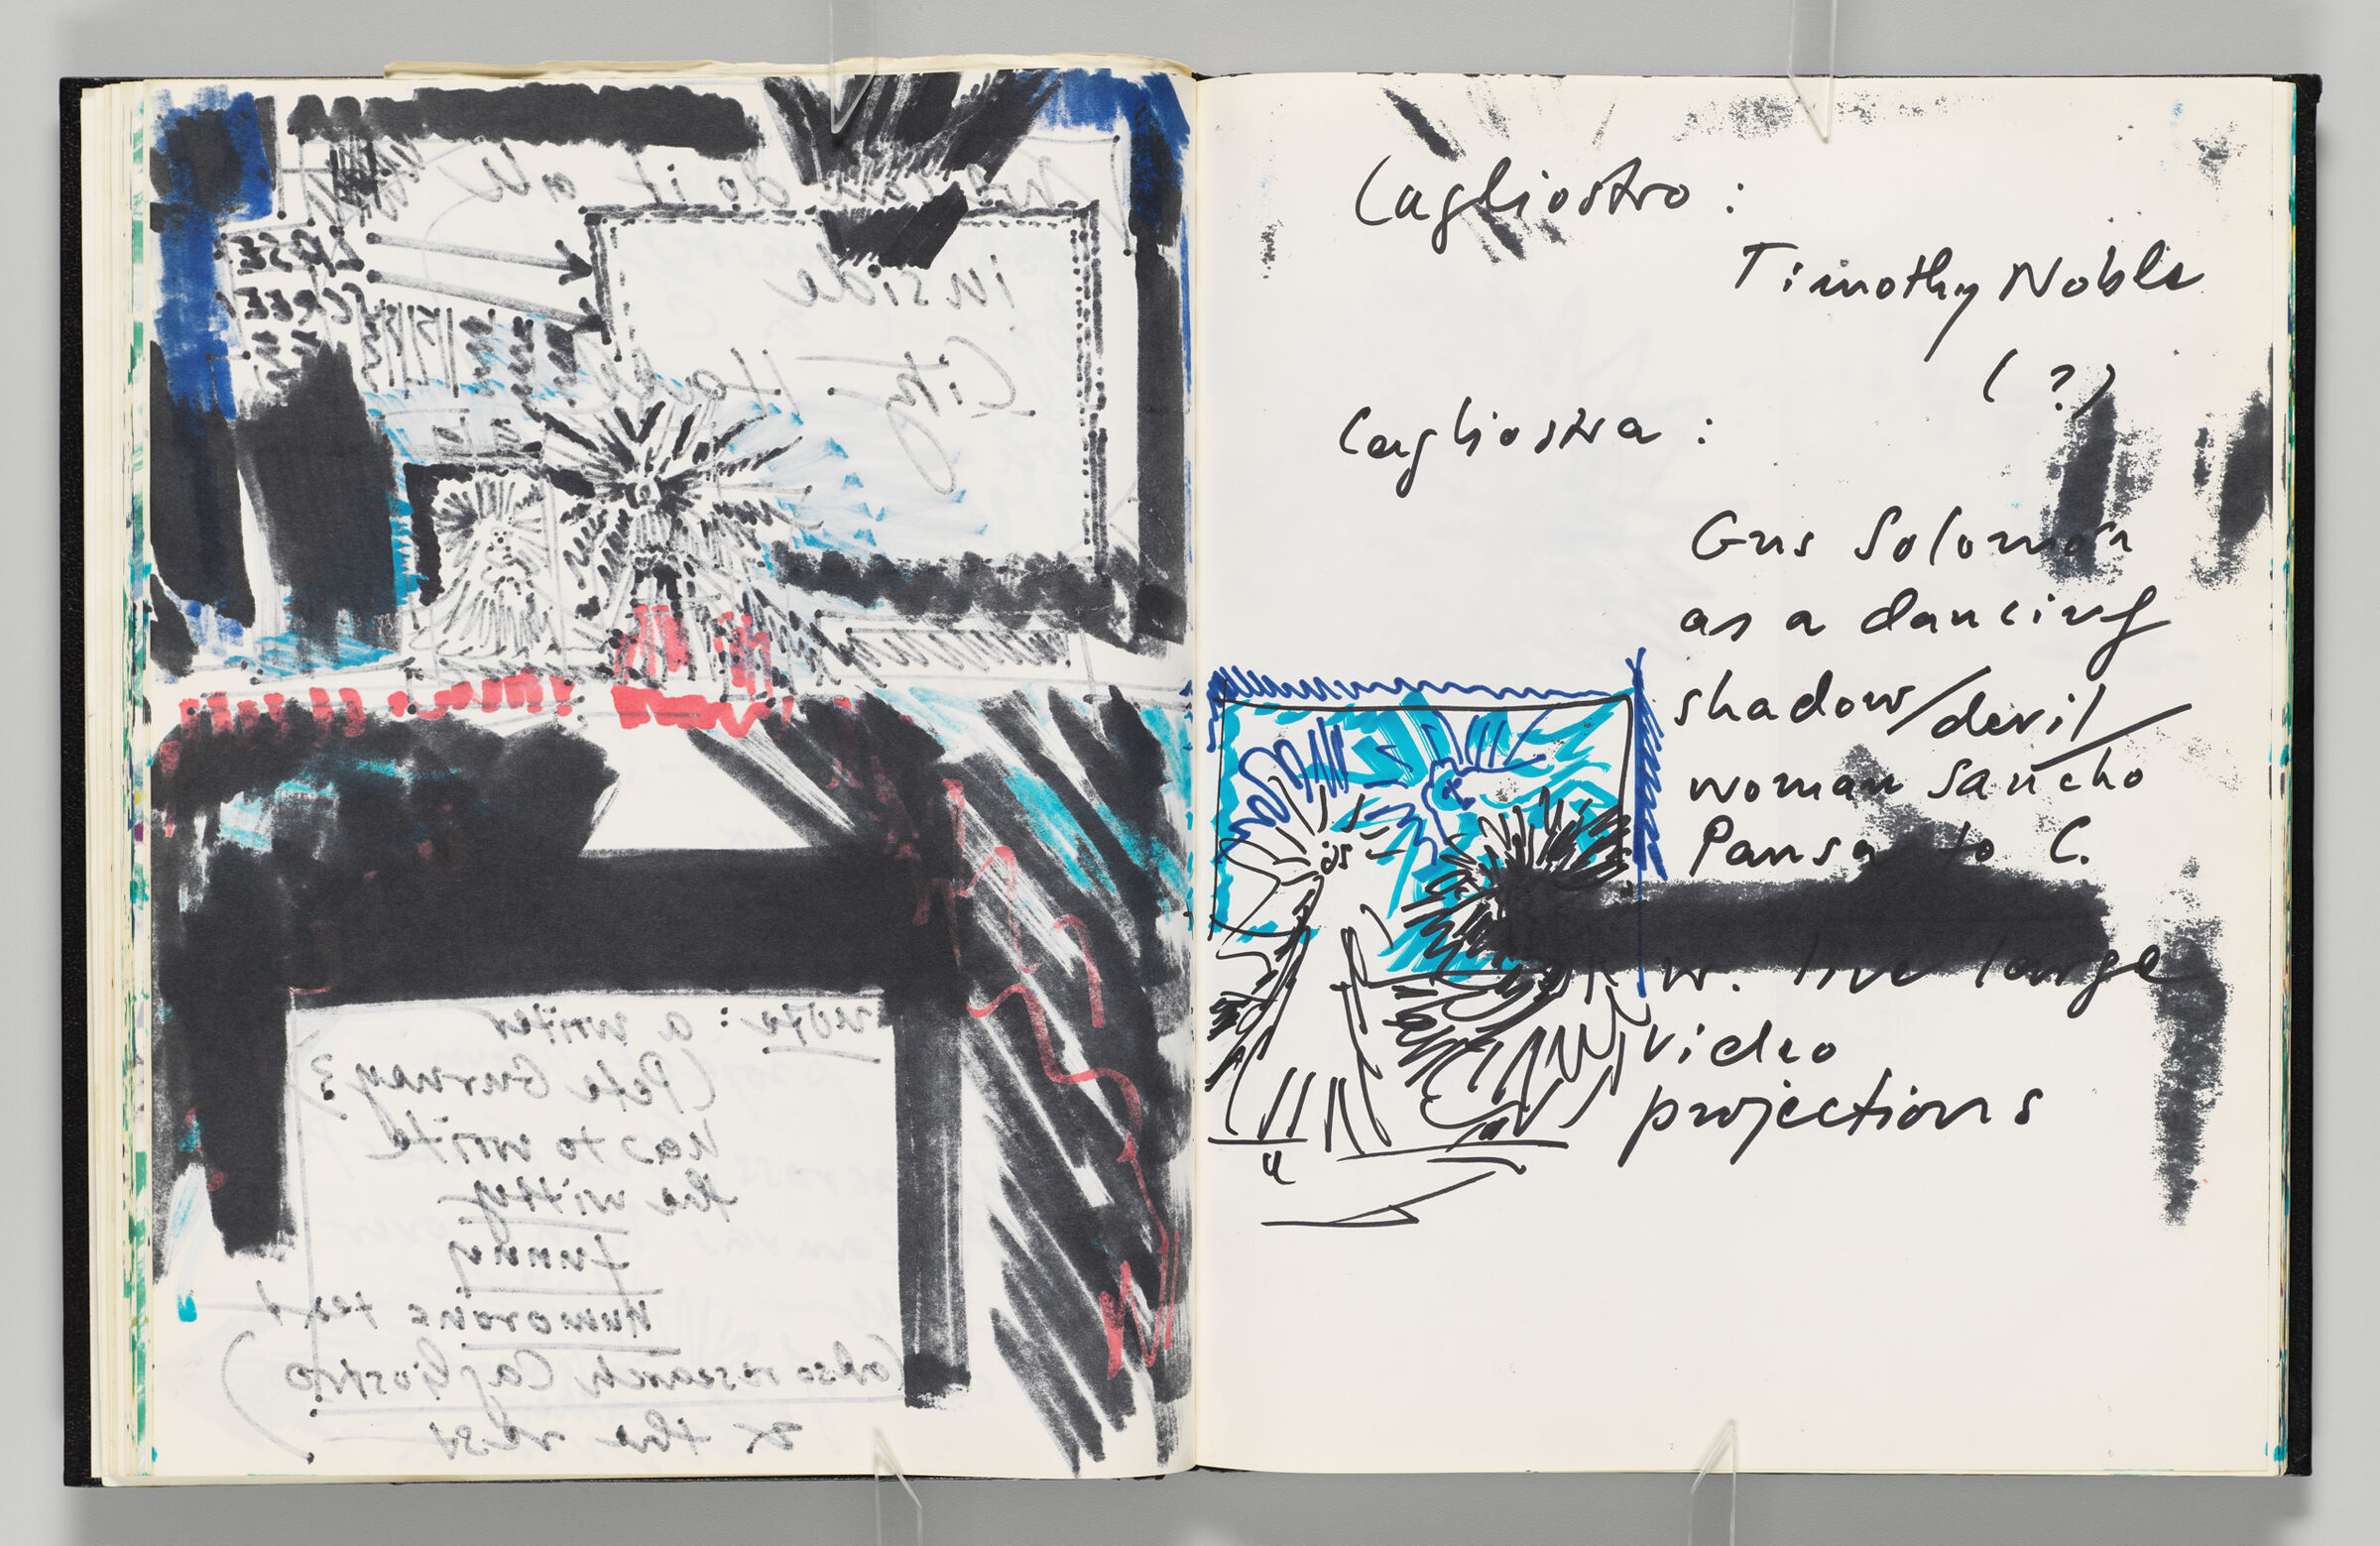 Untitled (Bleed-Through Of Previous Page, Left Page); Untitled (Notes And Projection Design, Right Page)